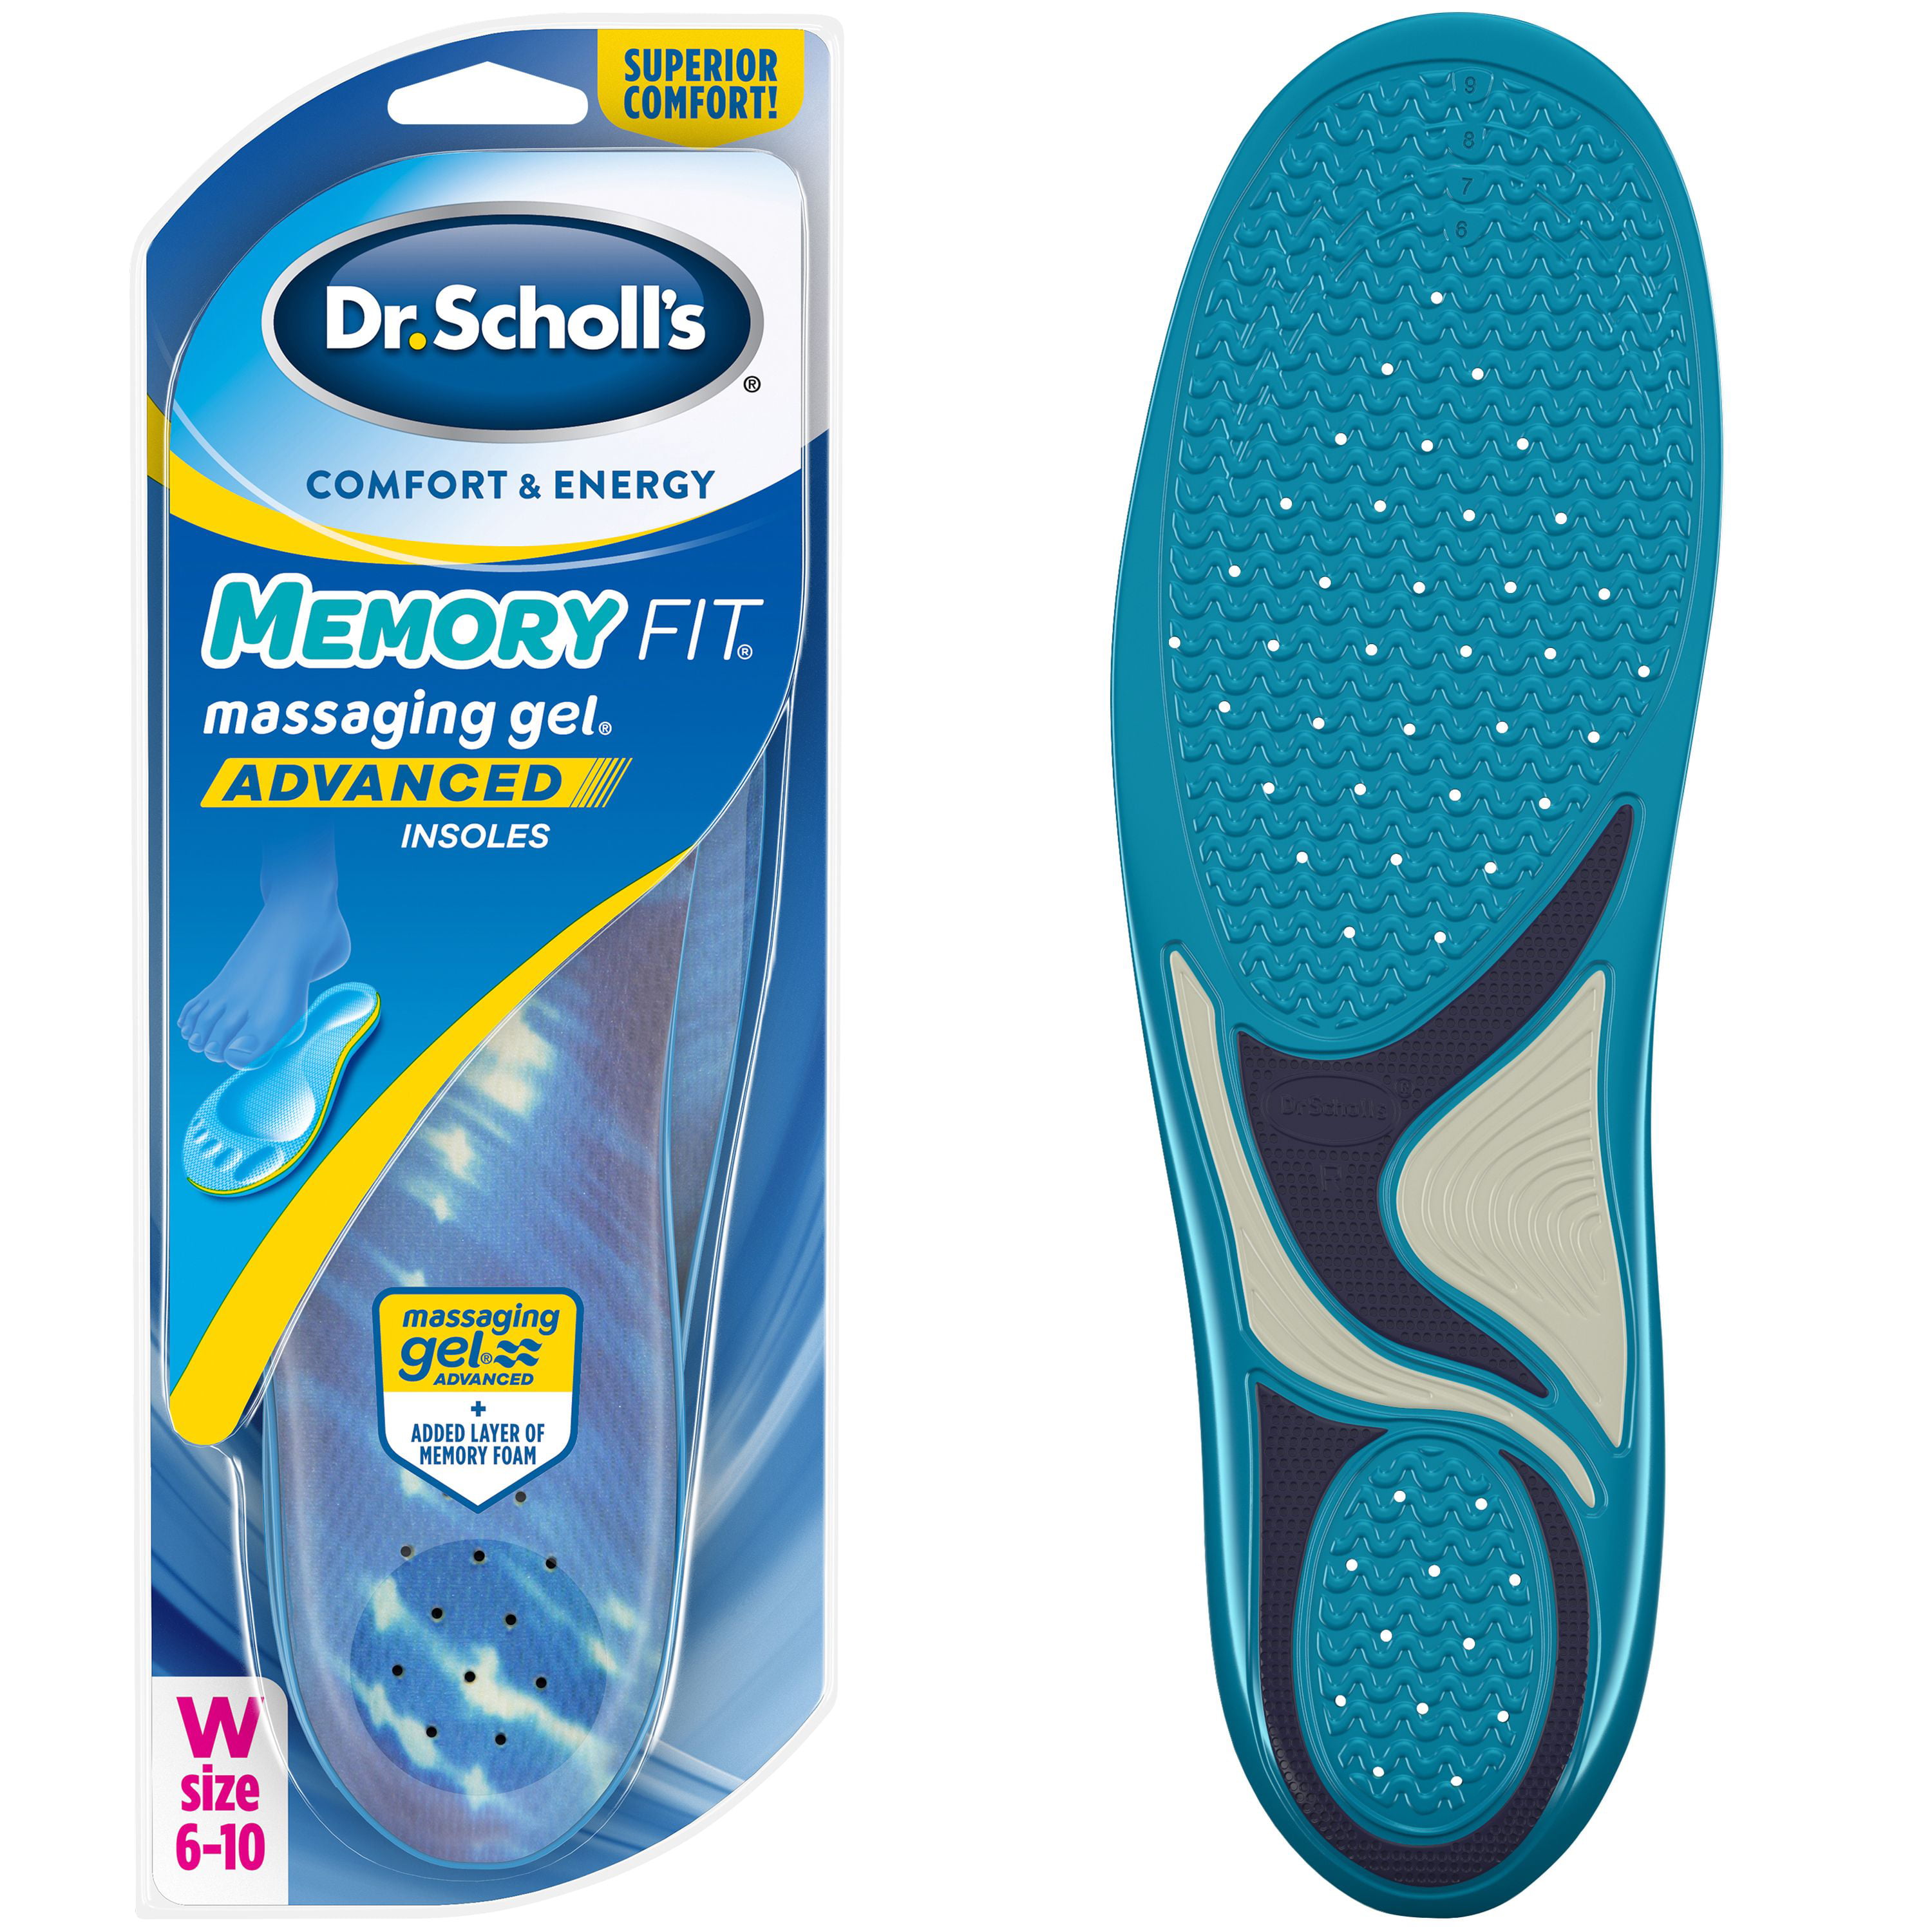 dr-scholl-s-memory-fit-insoles-with-massaging-gel-advanced-1-pair